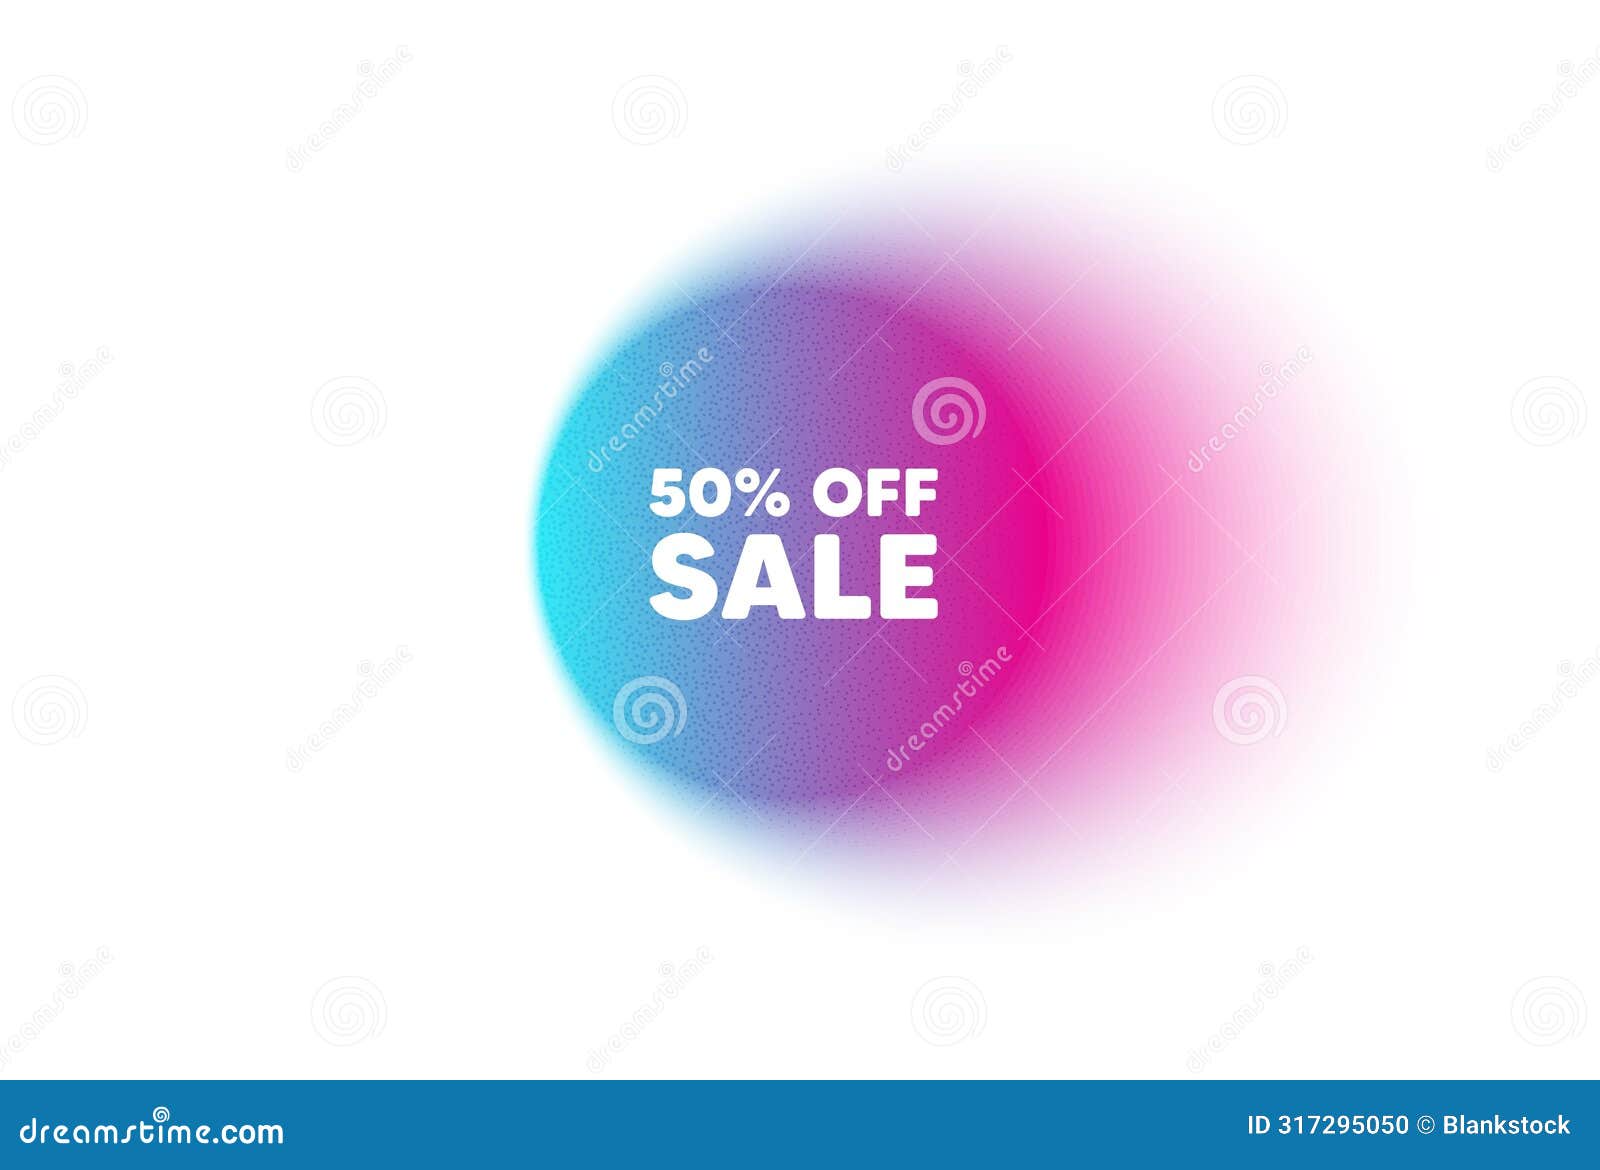 sale 50 percent off discount. promotion price offer sign. color neon gradient circle banner. 